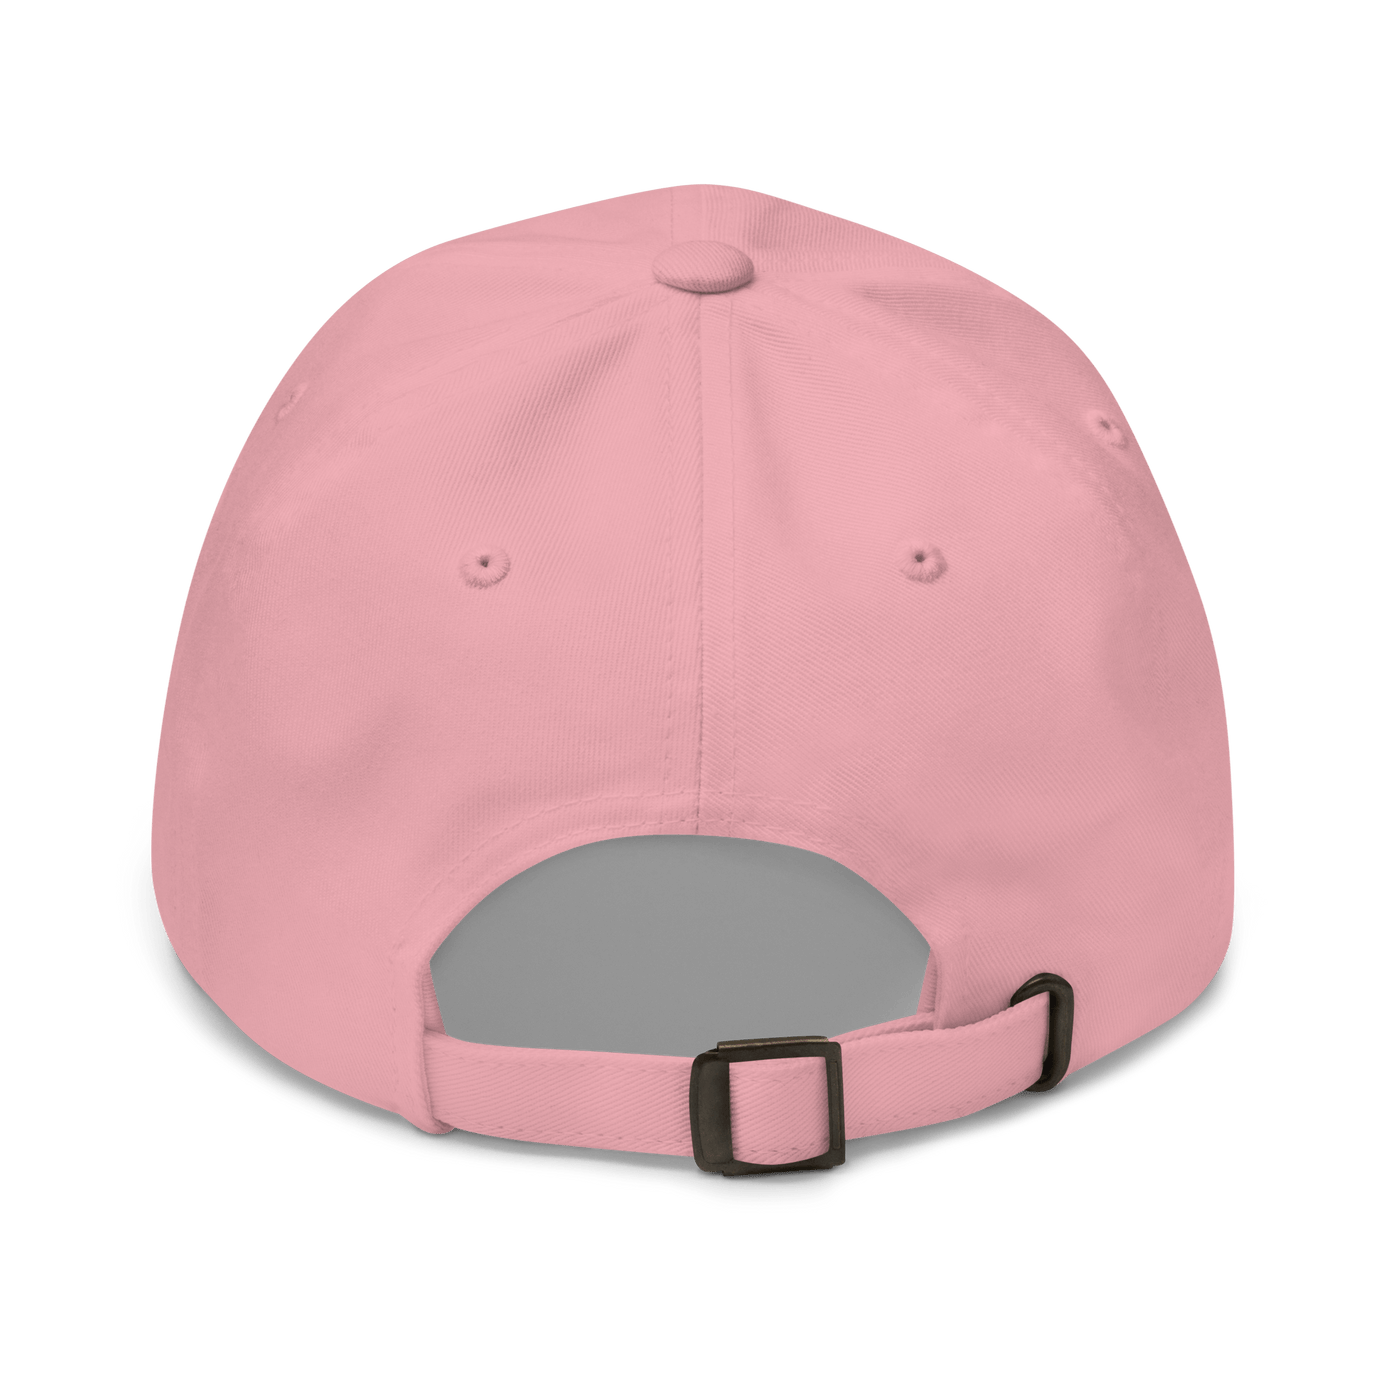 Ramen Bowl Dad hat - Pink - - Just Another Cap Store